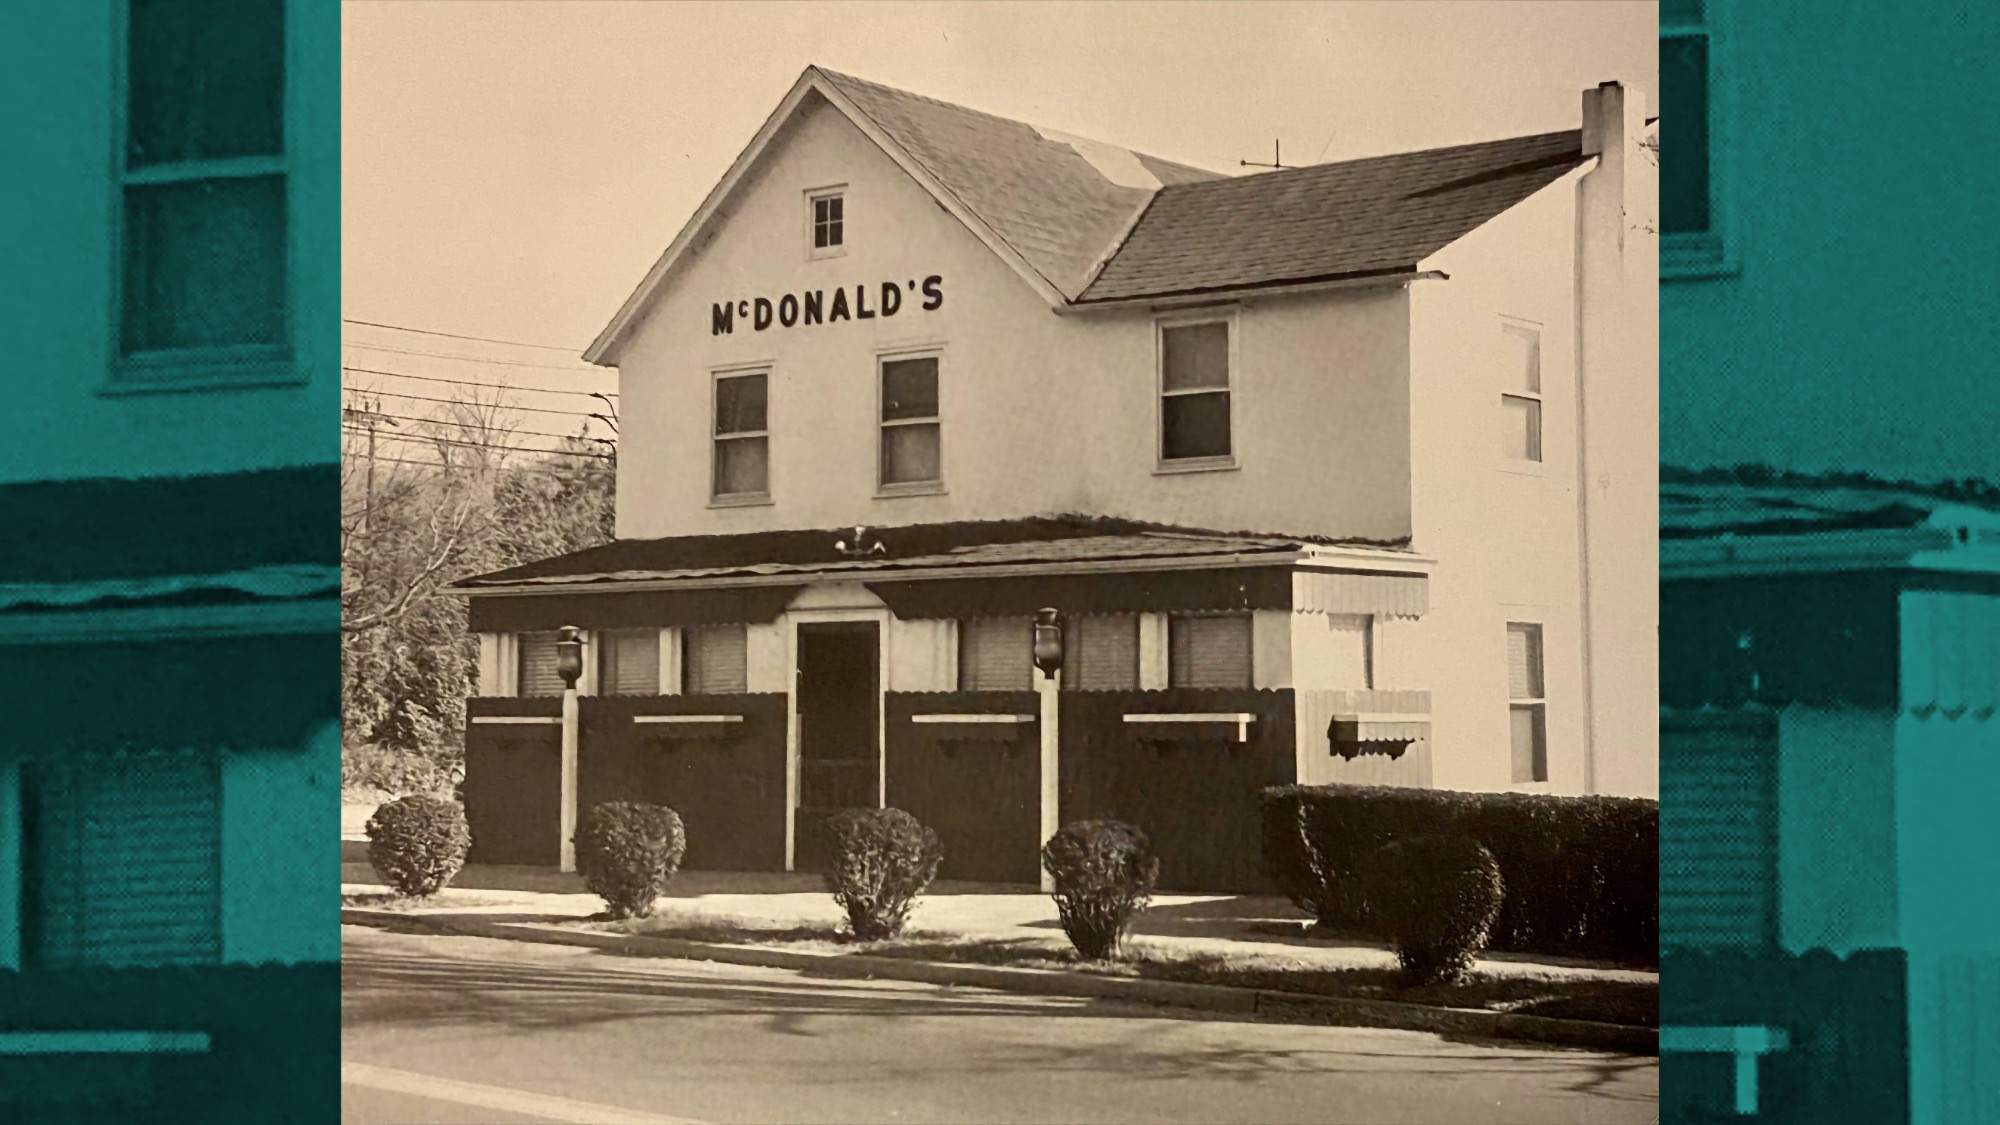 Montvale had McDonalds first — Pascack Press and Northern Valley Press